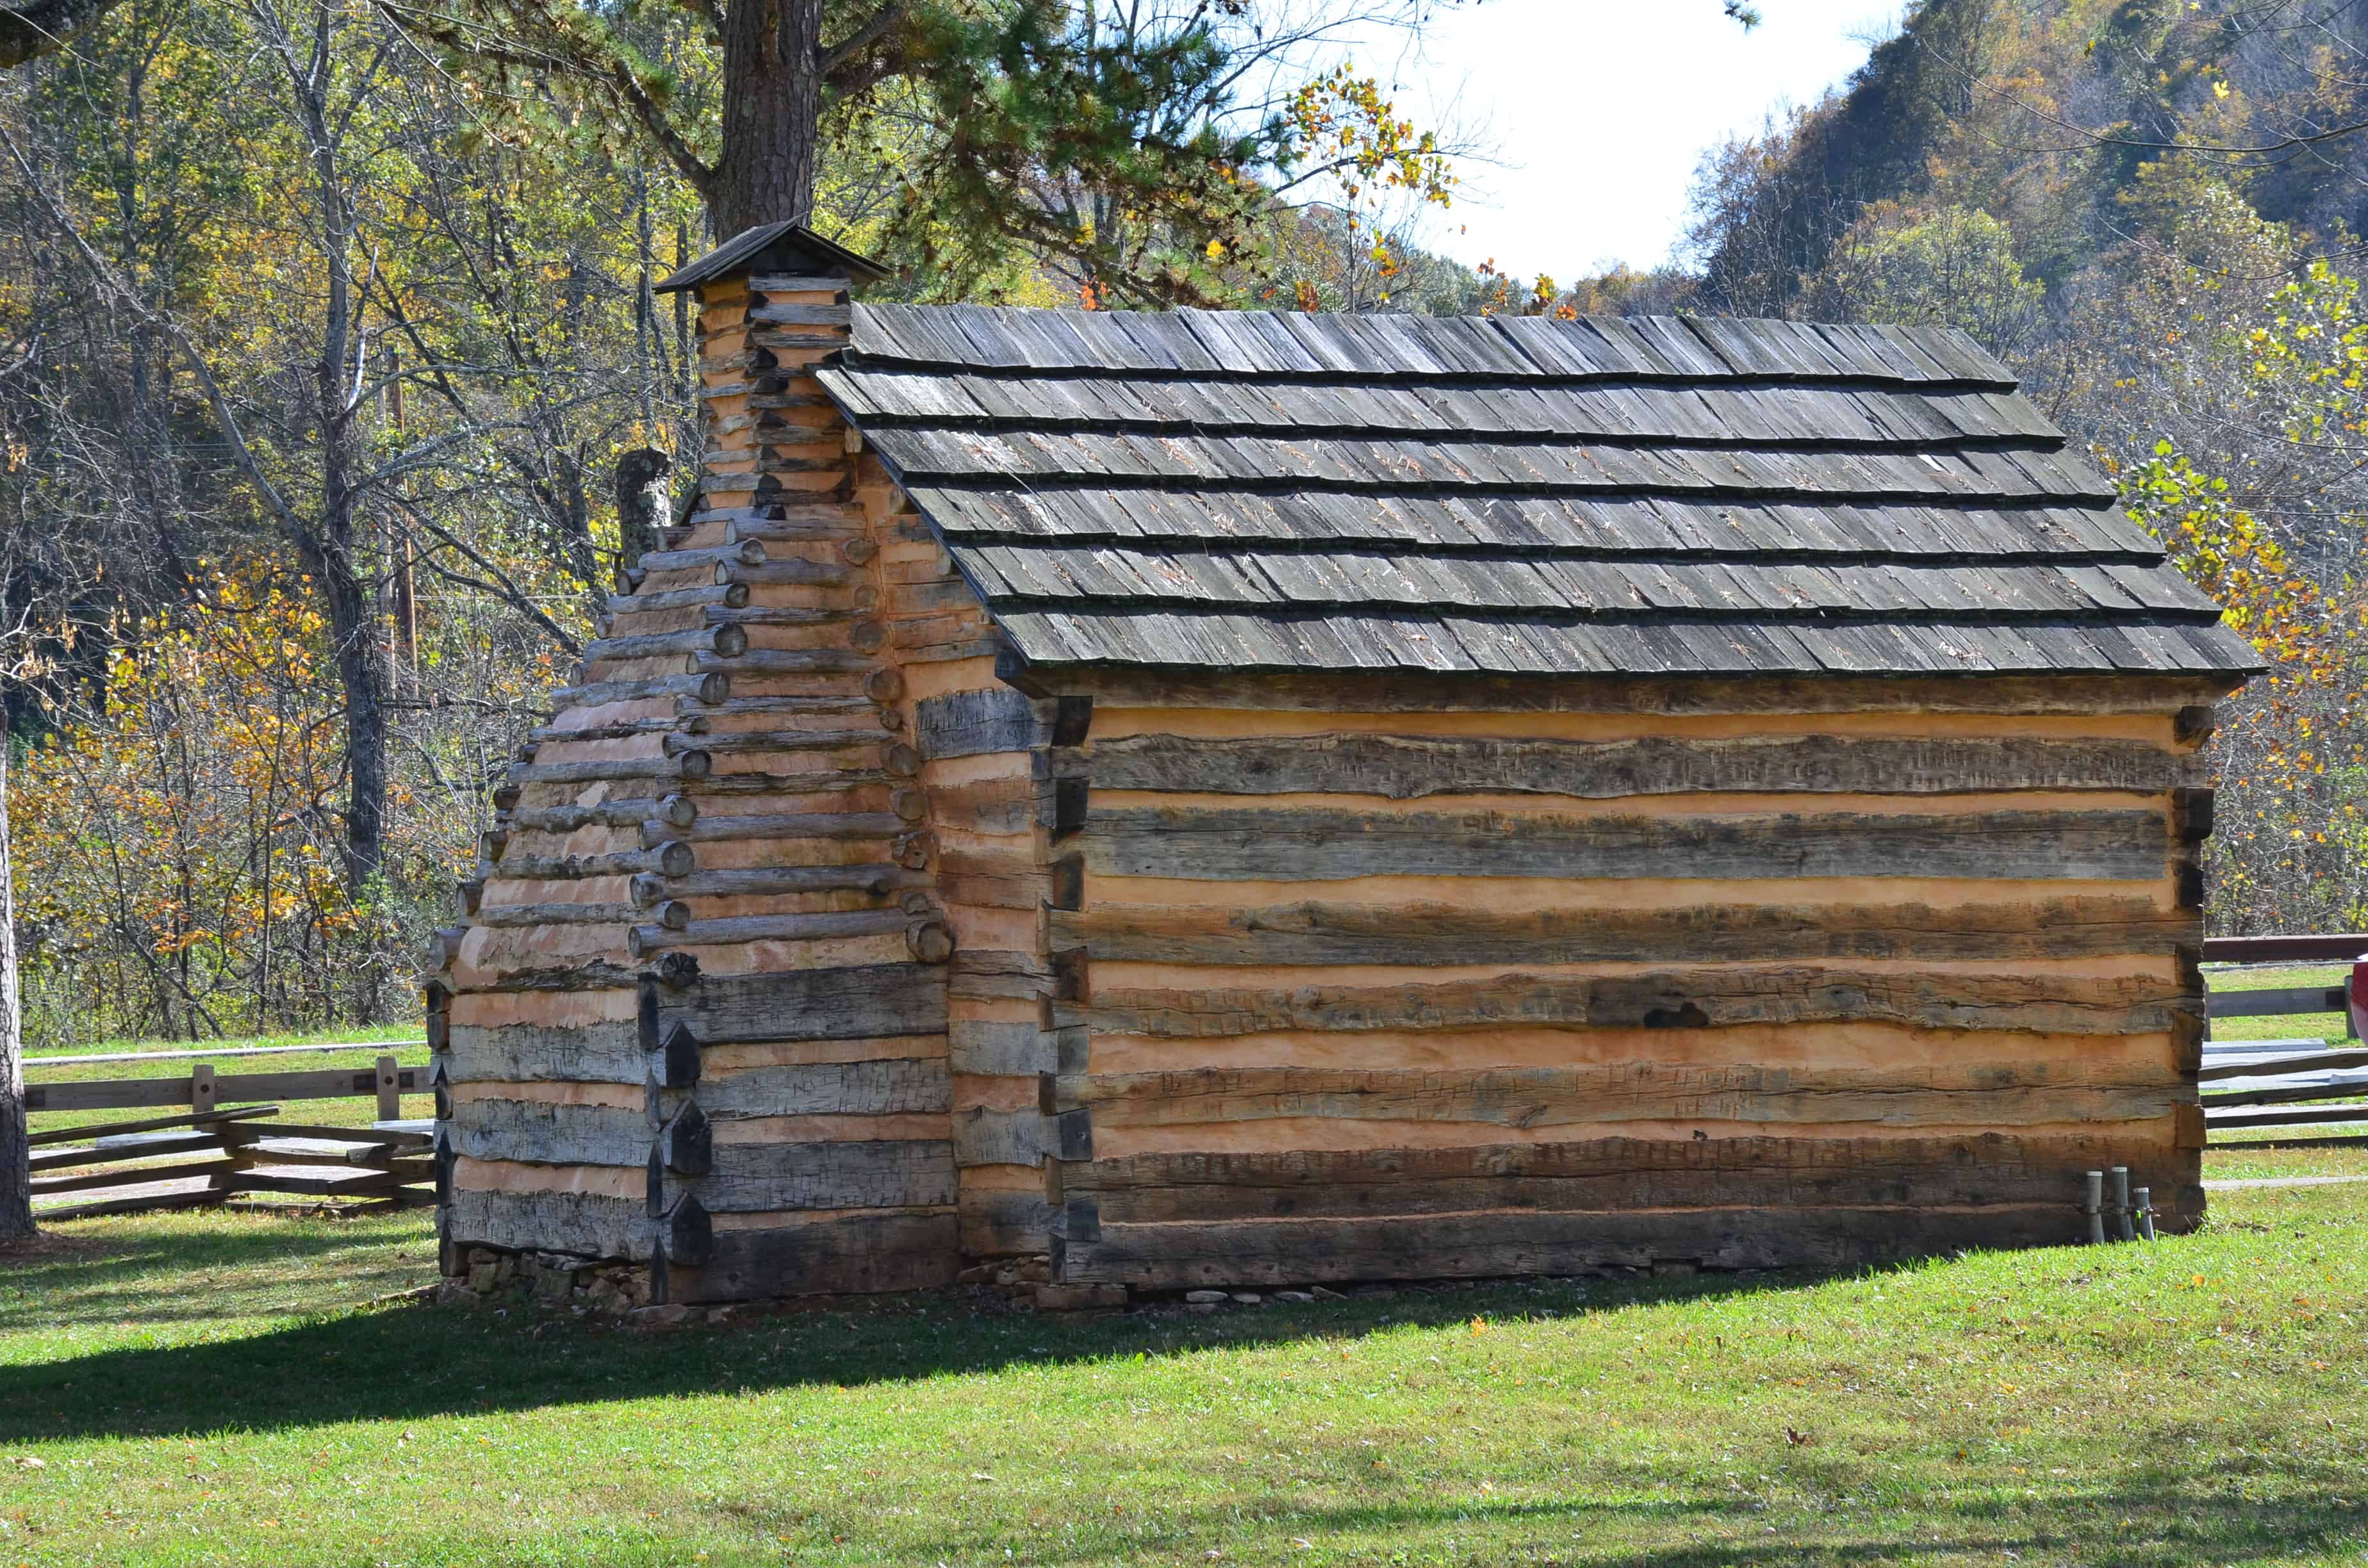 Gollaher cabin at Abraham Lincoln Birthplace National Historical Park in Kentucky